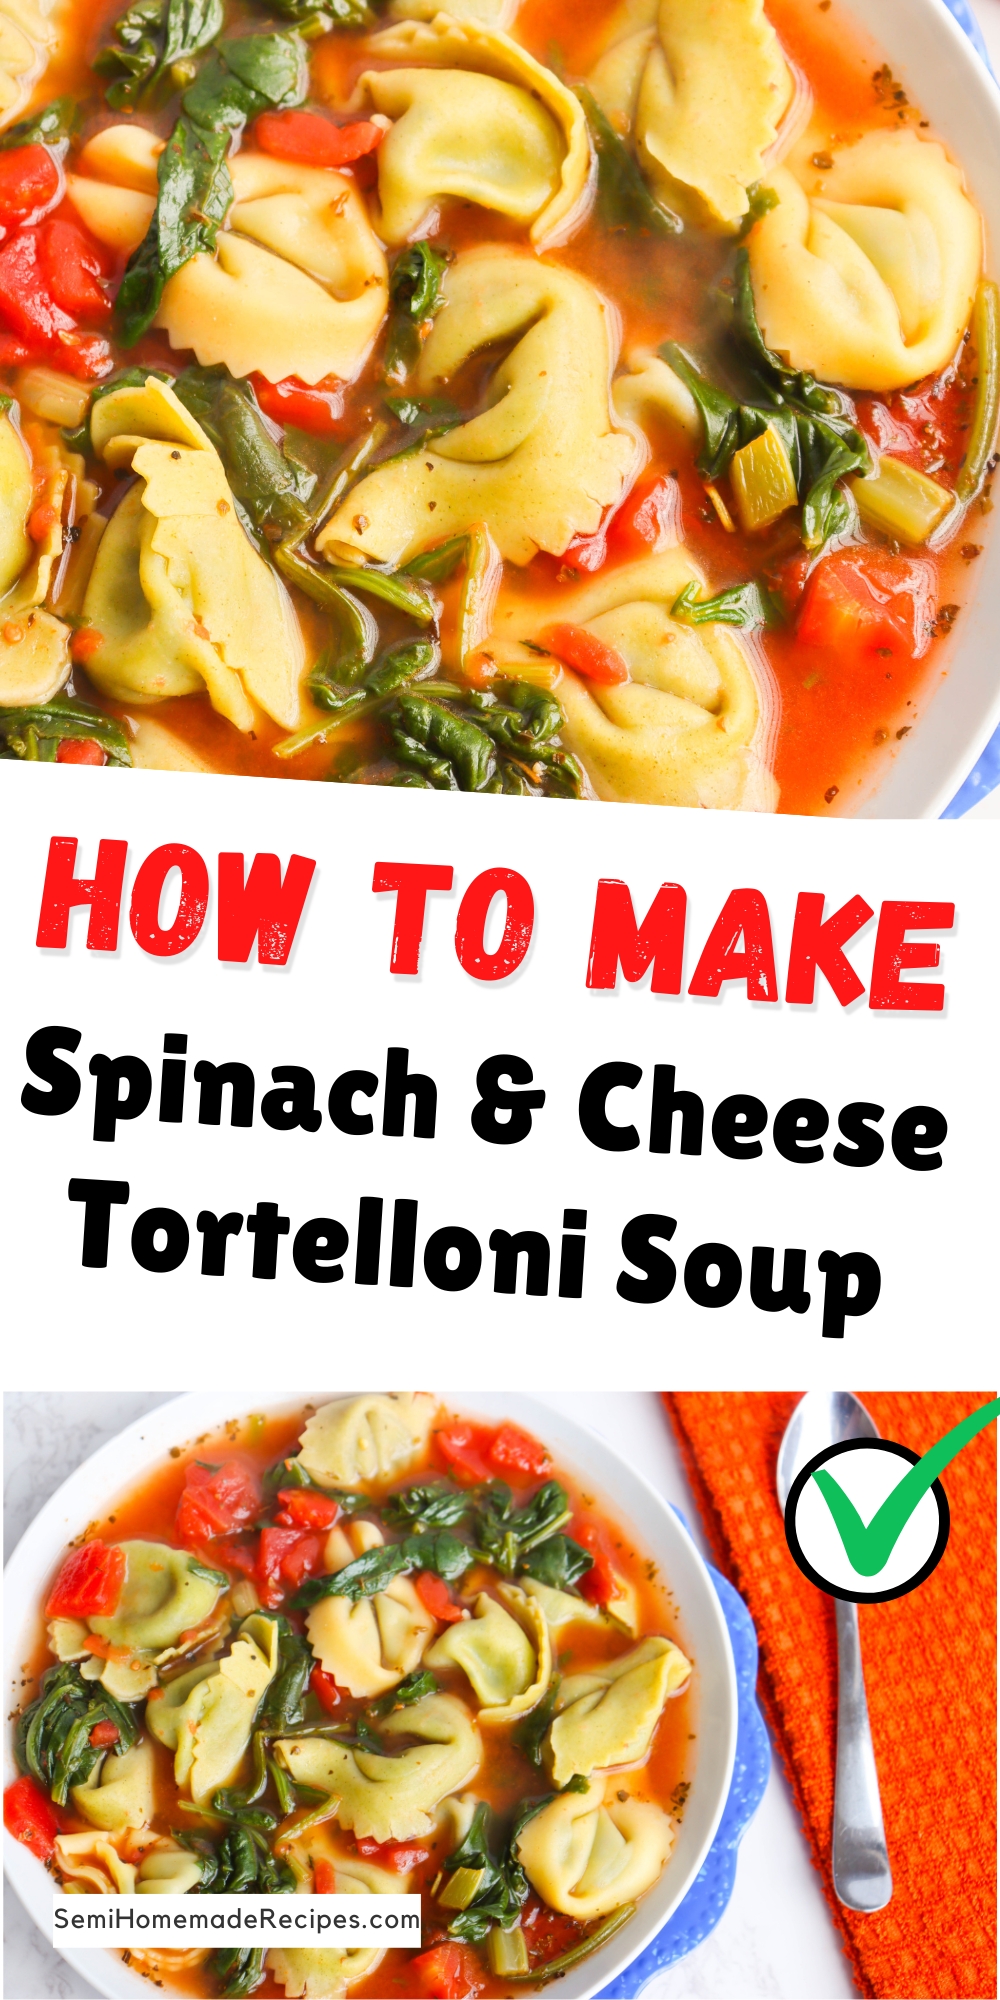 Discover the secret to creating a warm and satisfying bowl of Spinach & Cheese Tortelloni Soup that will leave you feeling cozy and content. Psst....the semi homemade ingredients will help get this soup ready in a jiffy! 